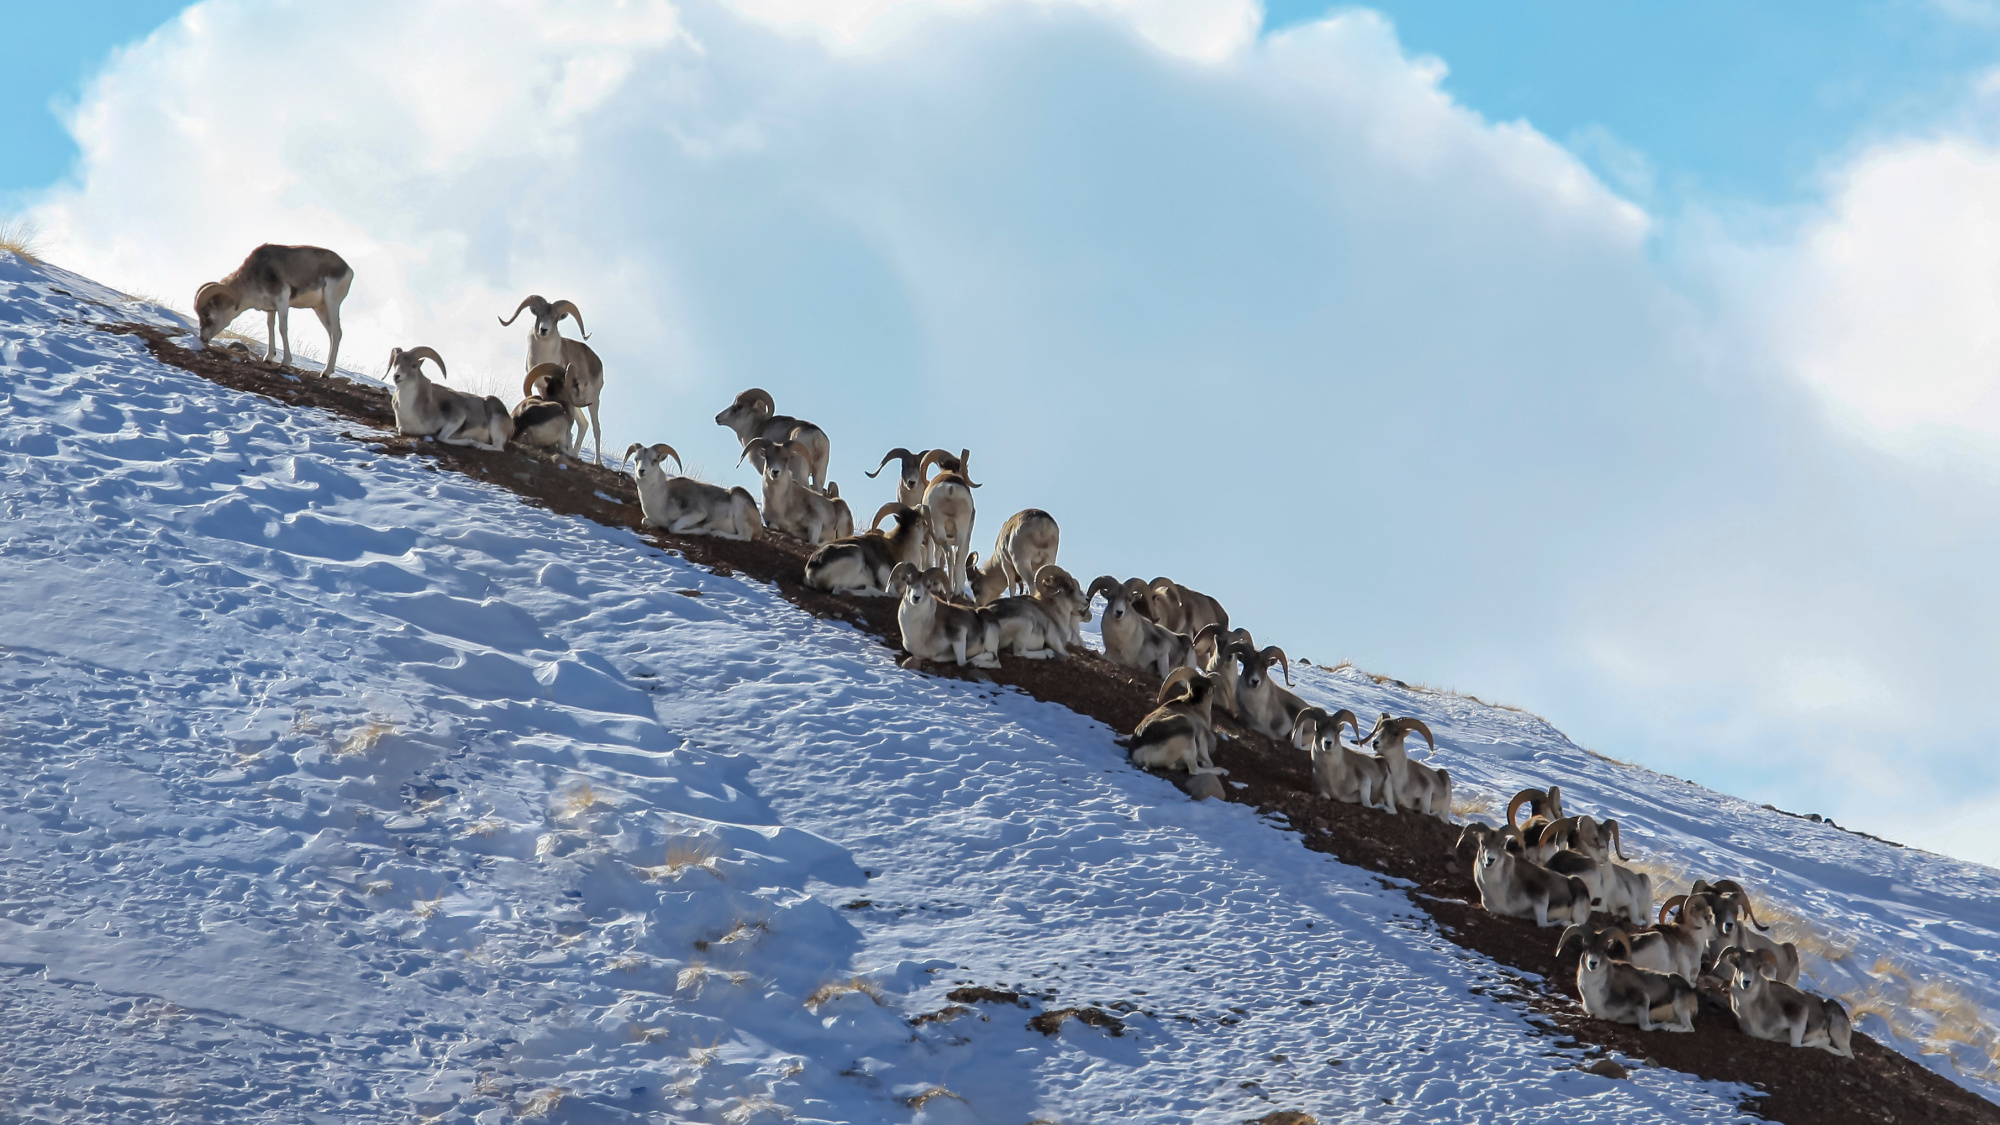 A flock of Marco Polo sheep rest on a hillside.